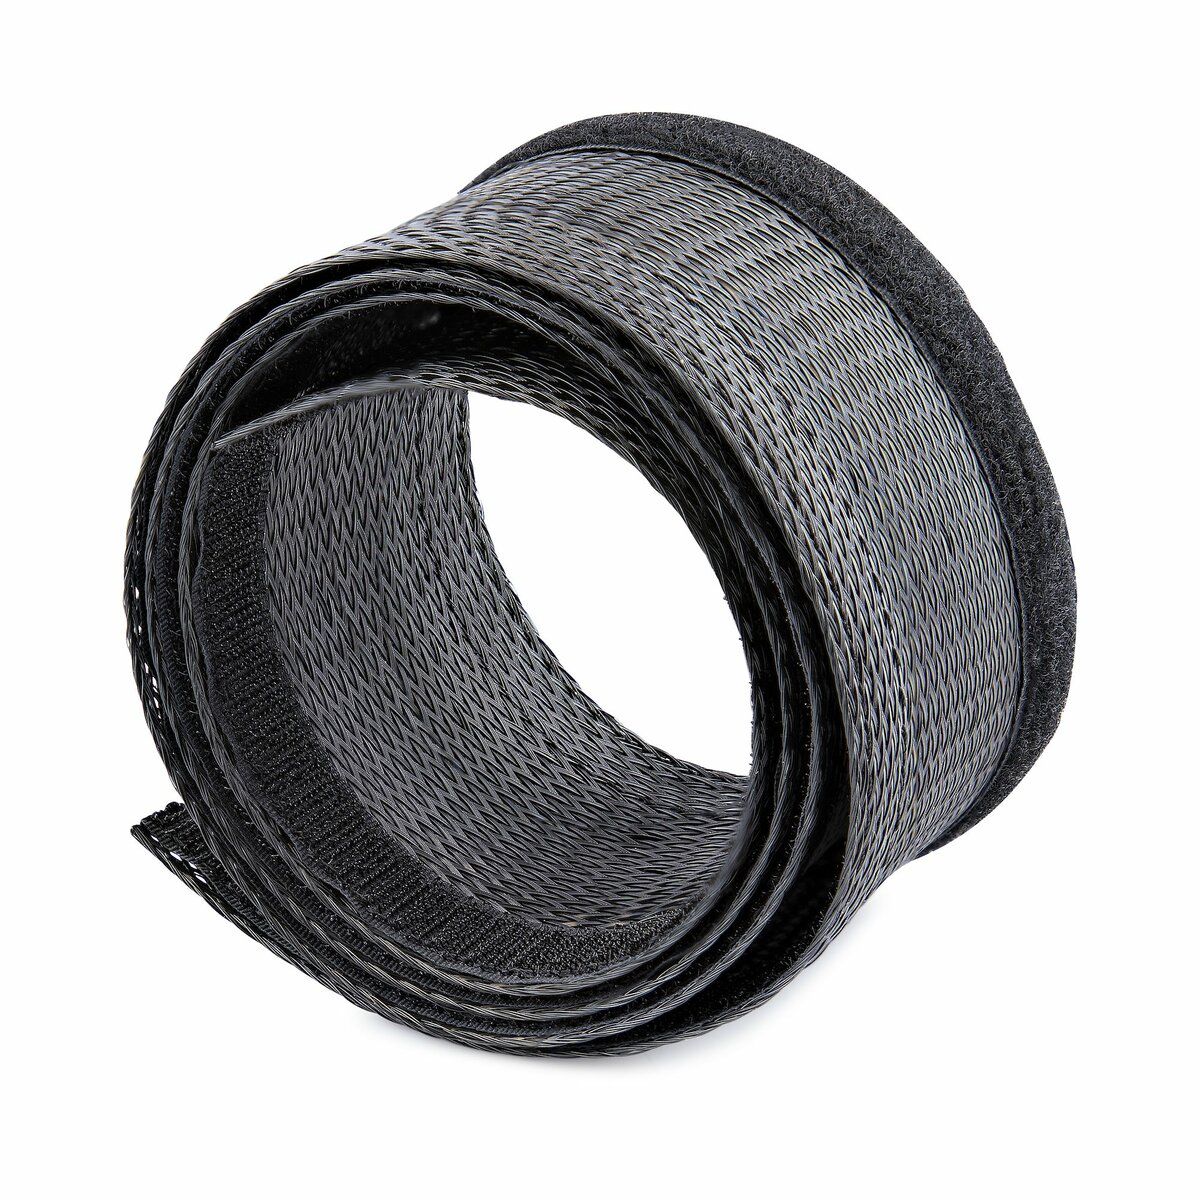 15' (4.6m) Cable Management Sleeve - Flexible Coiled Cable Wrap - 1.0-1.5  dia. Expandable Sleeve - Polyester Cord Manager/Protector/Concealer - Black